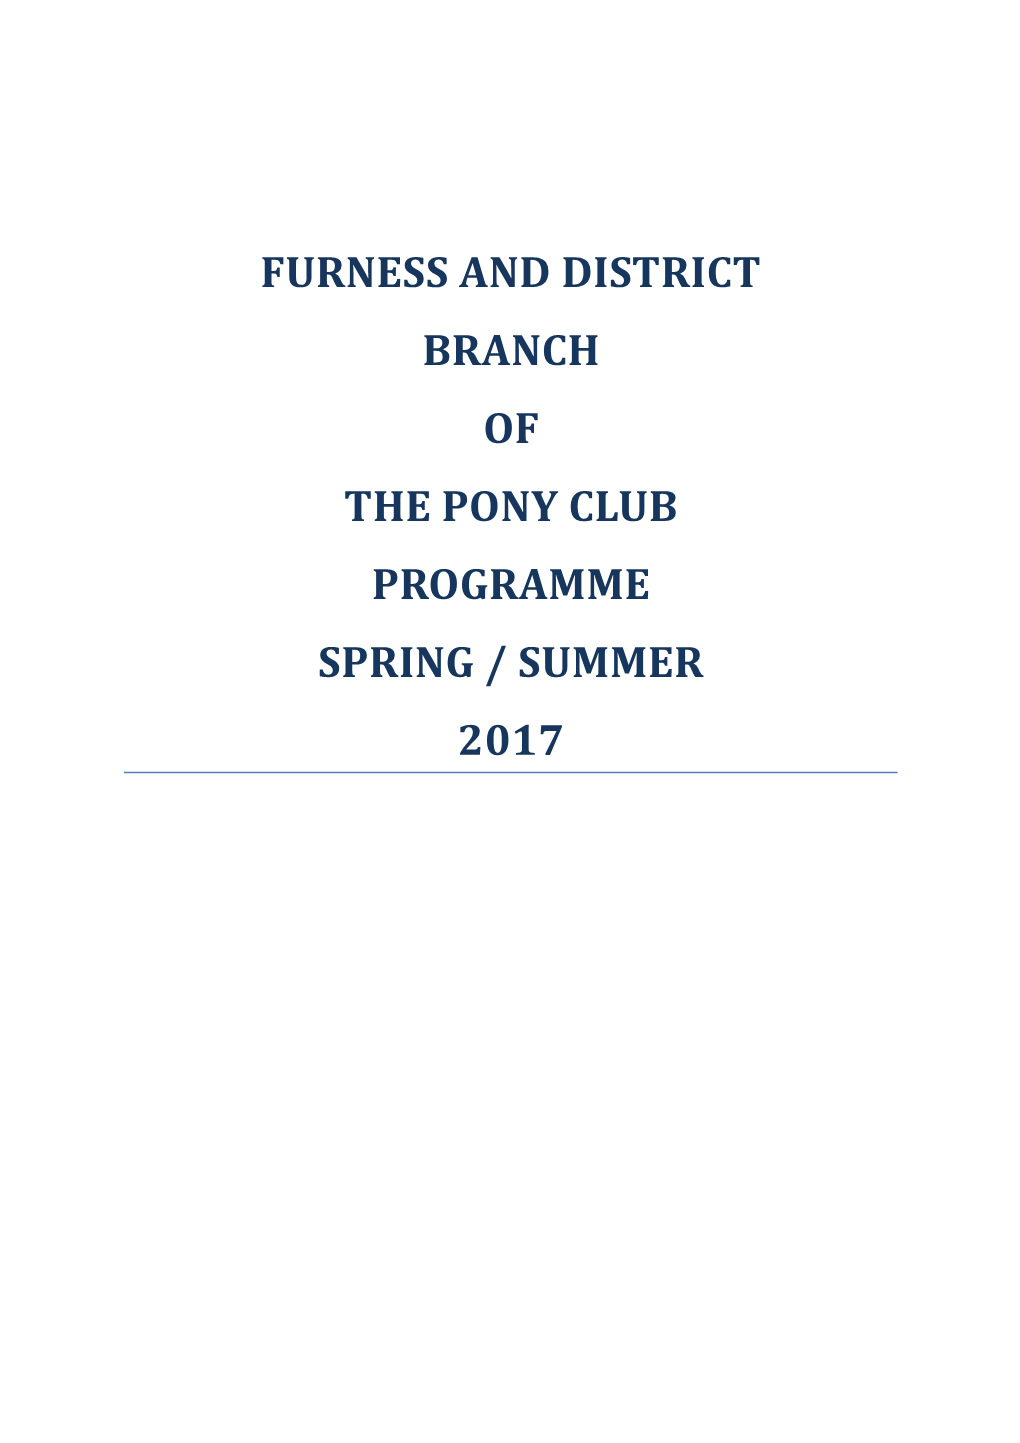 Furness and District Branch of the Pony Club Committee